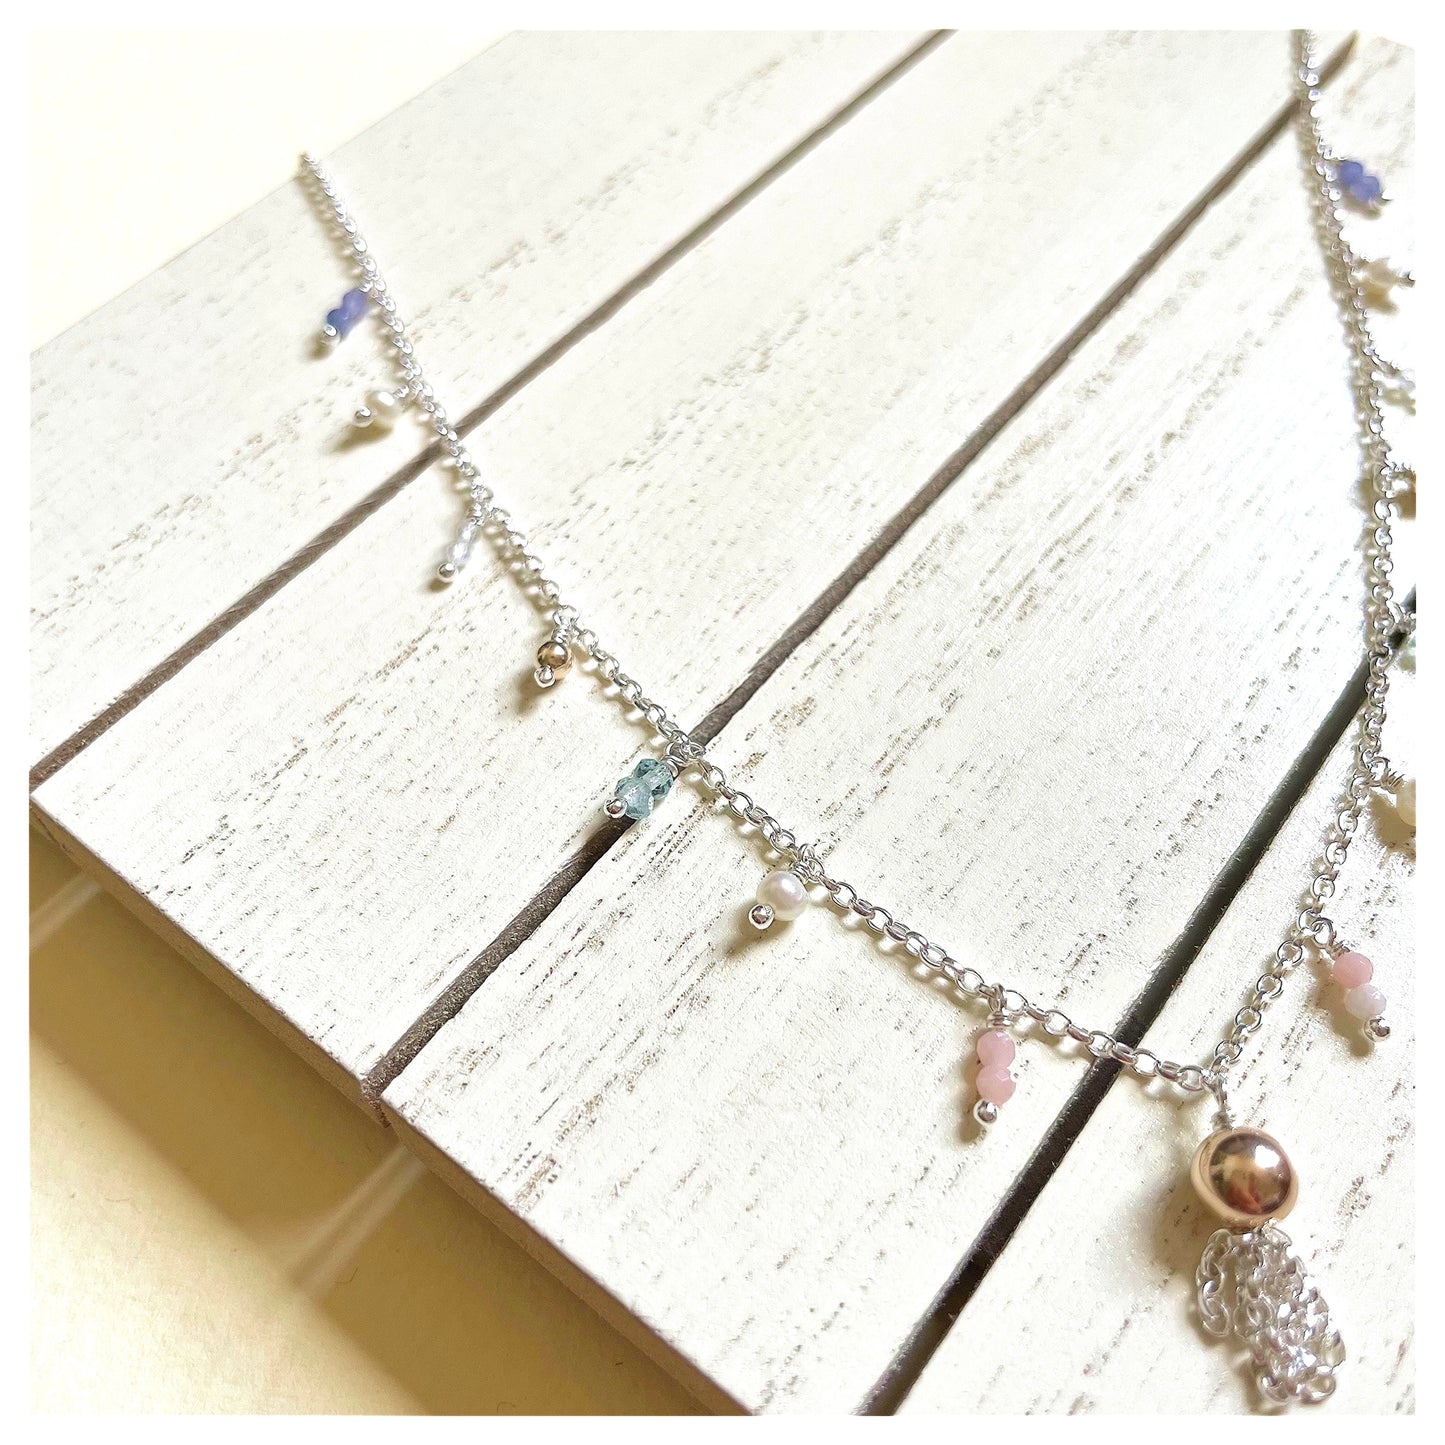 9ct Yellow Gold, Sterling Silver and Pastel Gemstone Mix Beaded Tassel Necklace.